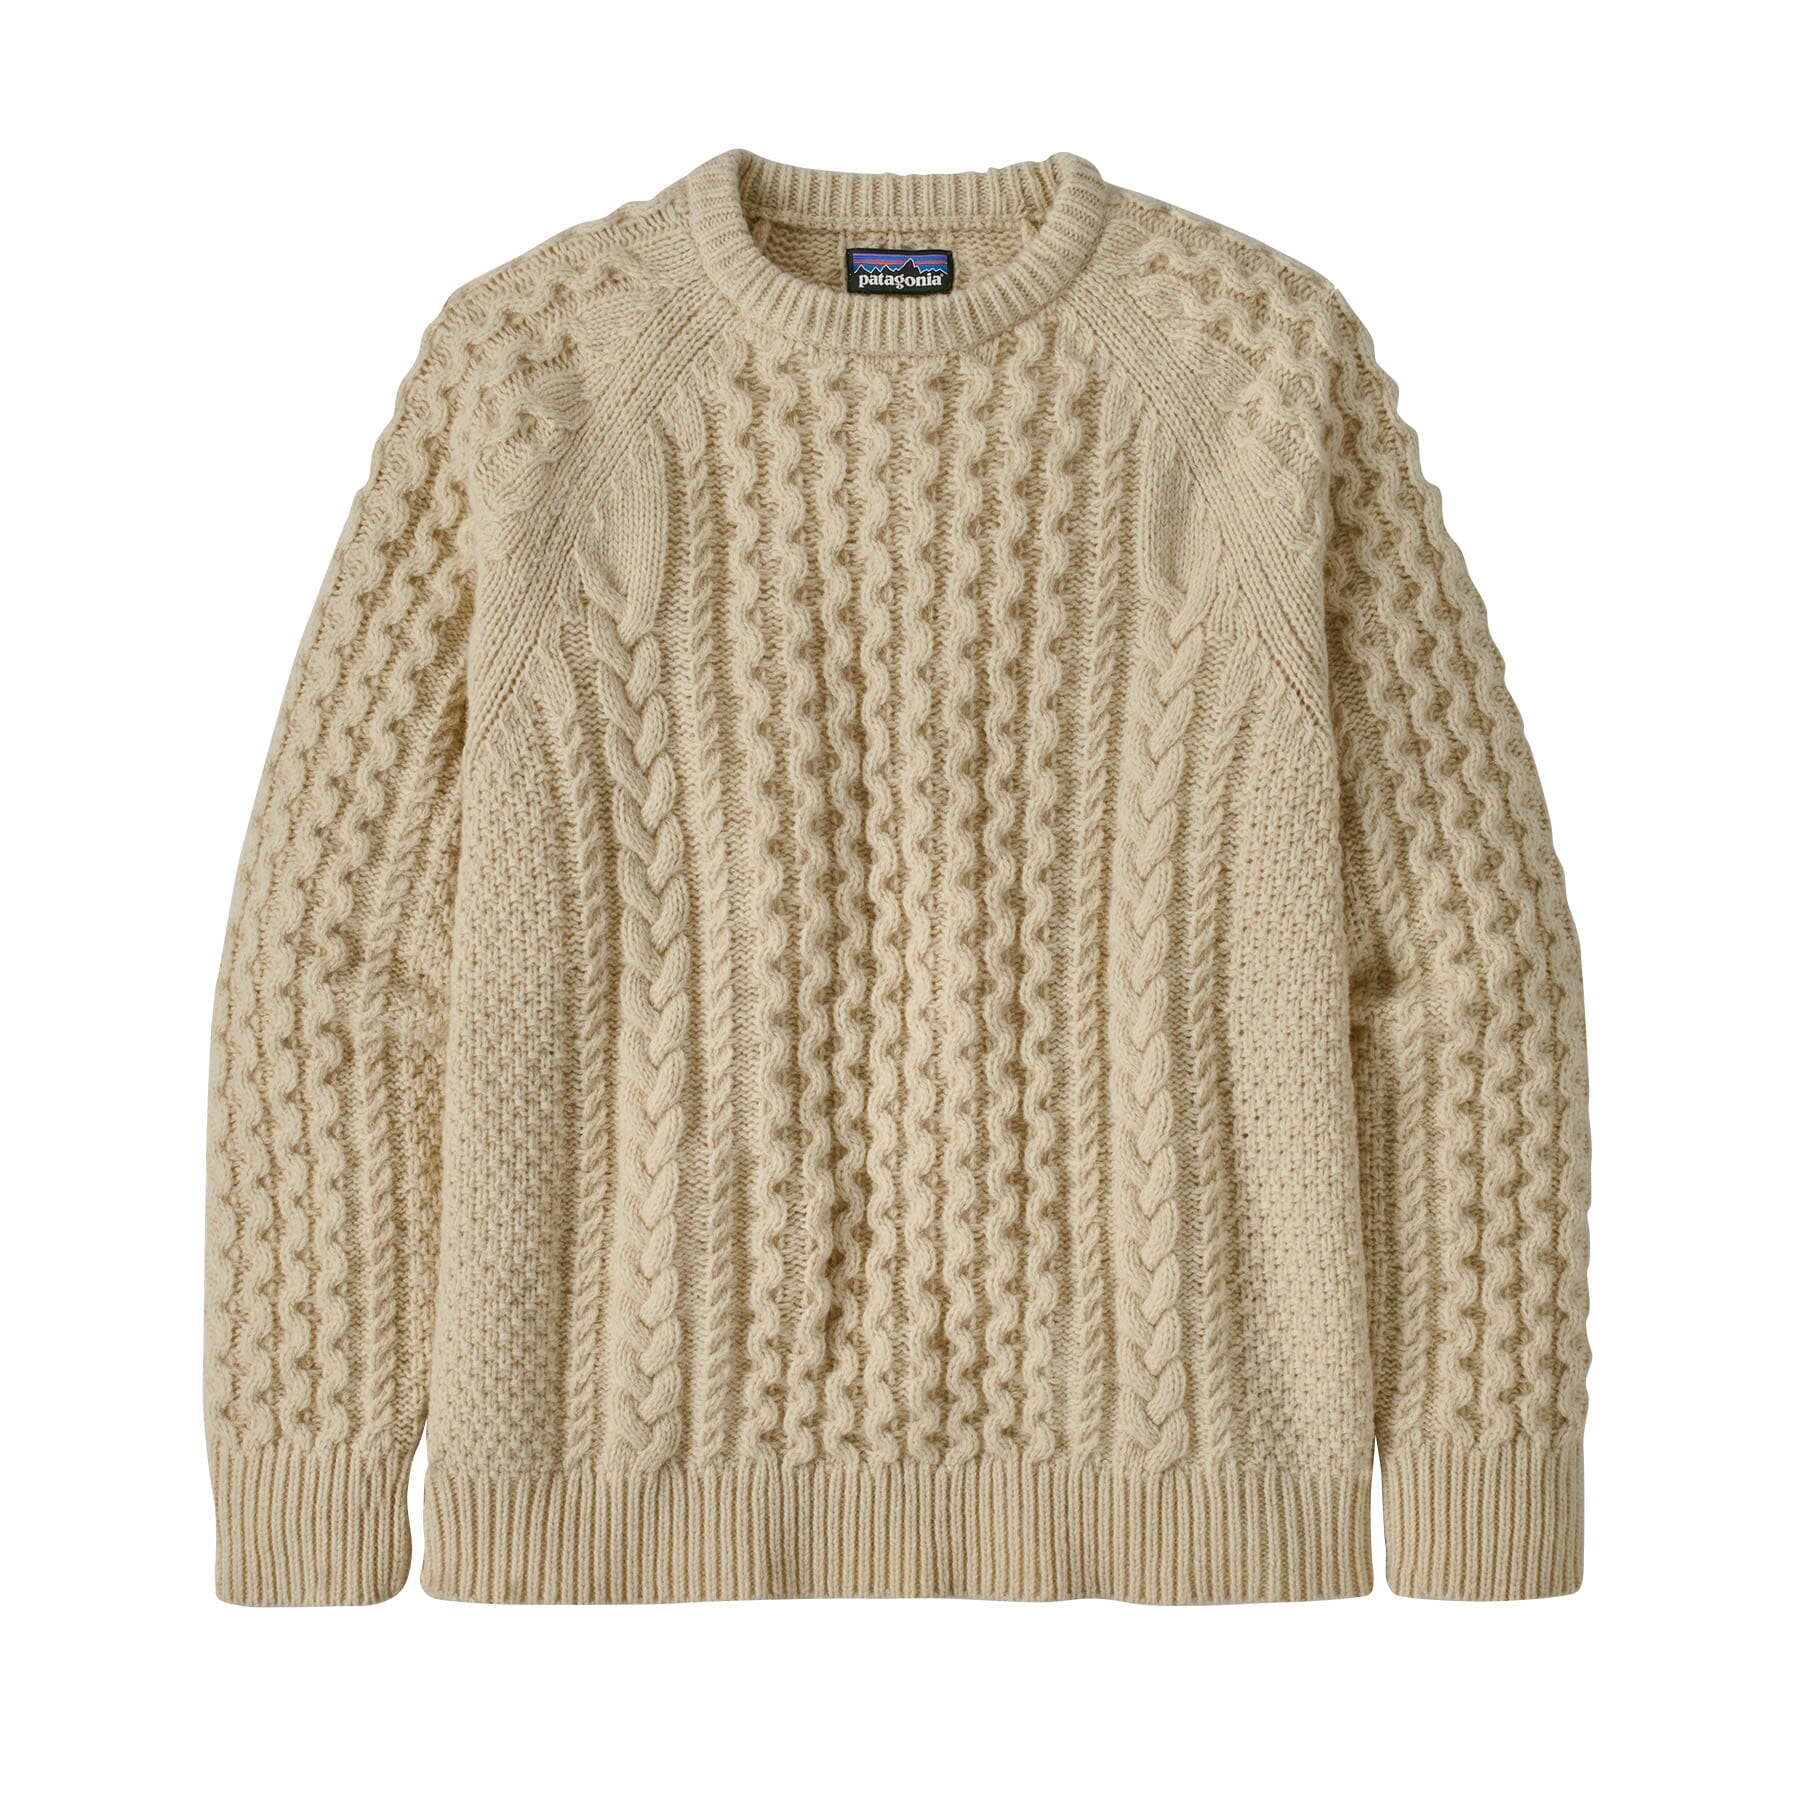 Patagonia Unisex Cable Knit Crewneck Sweater - Recycled Wool & Recycled Nylon Natural